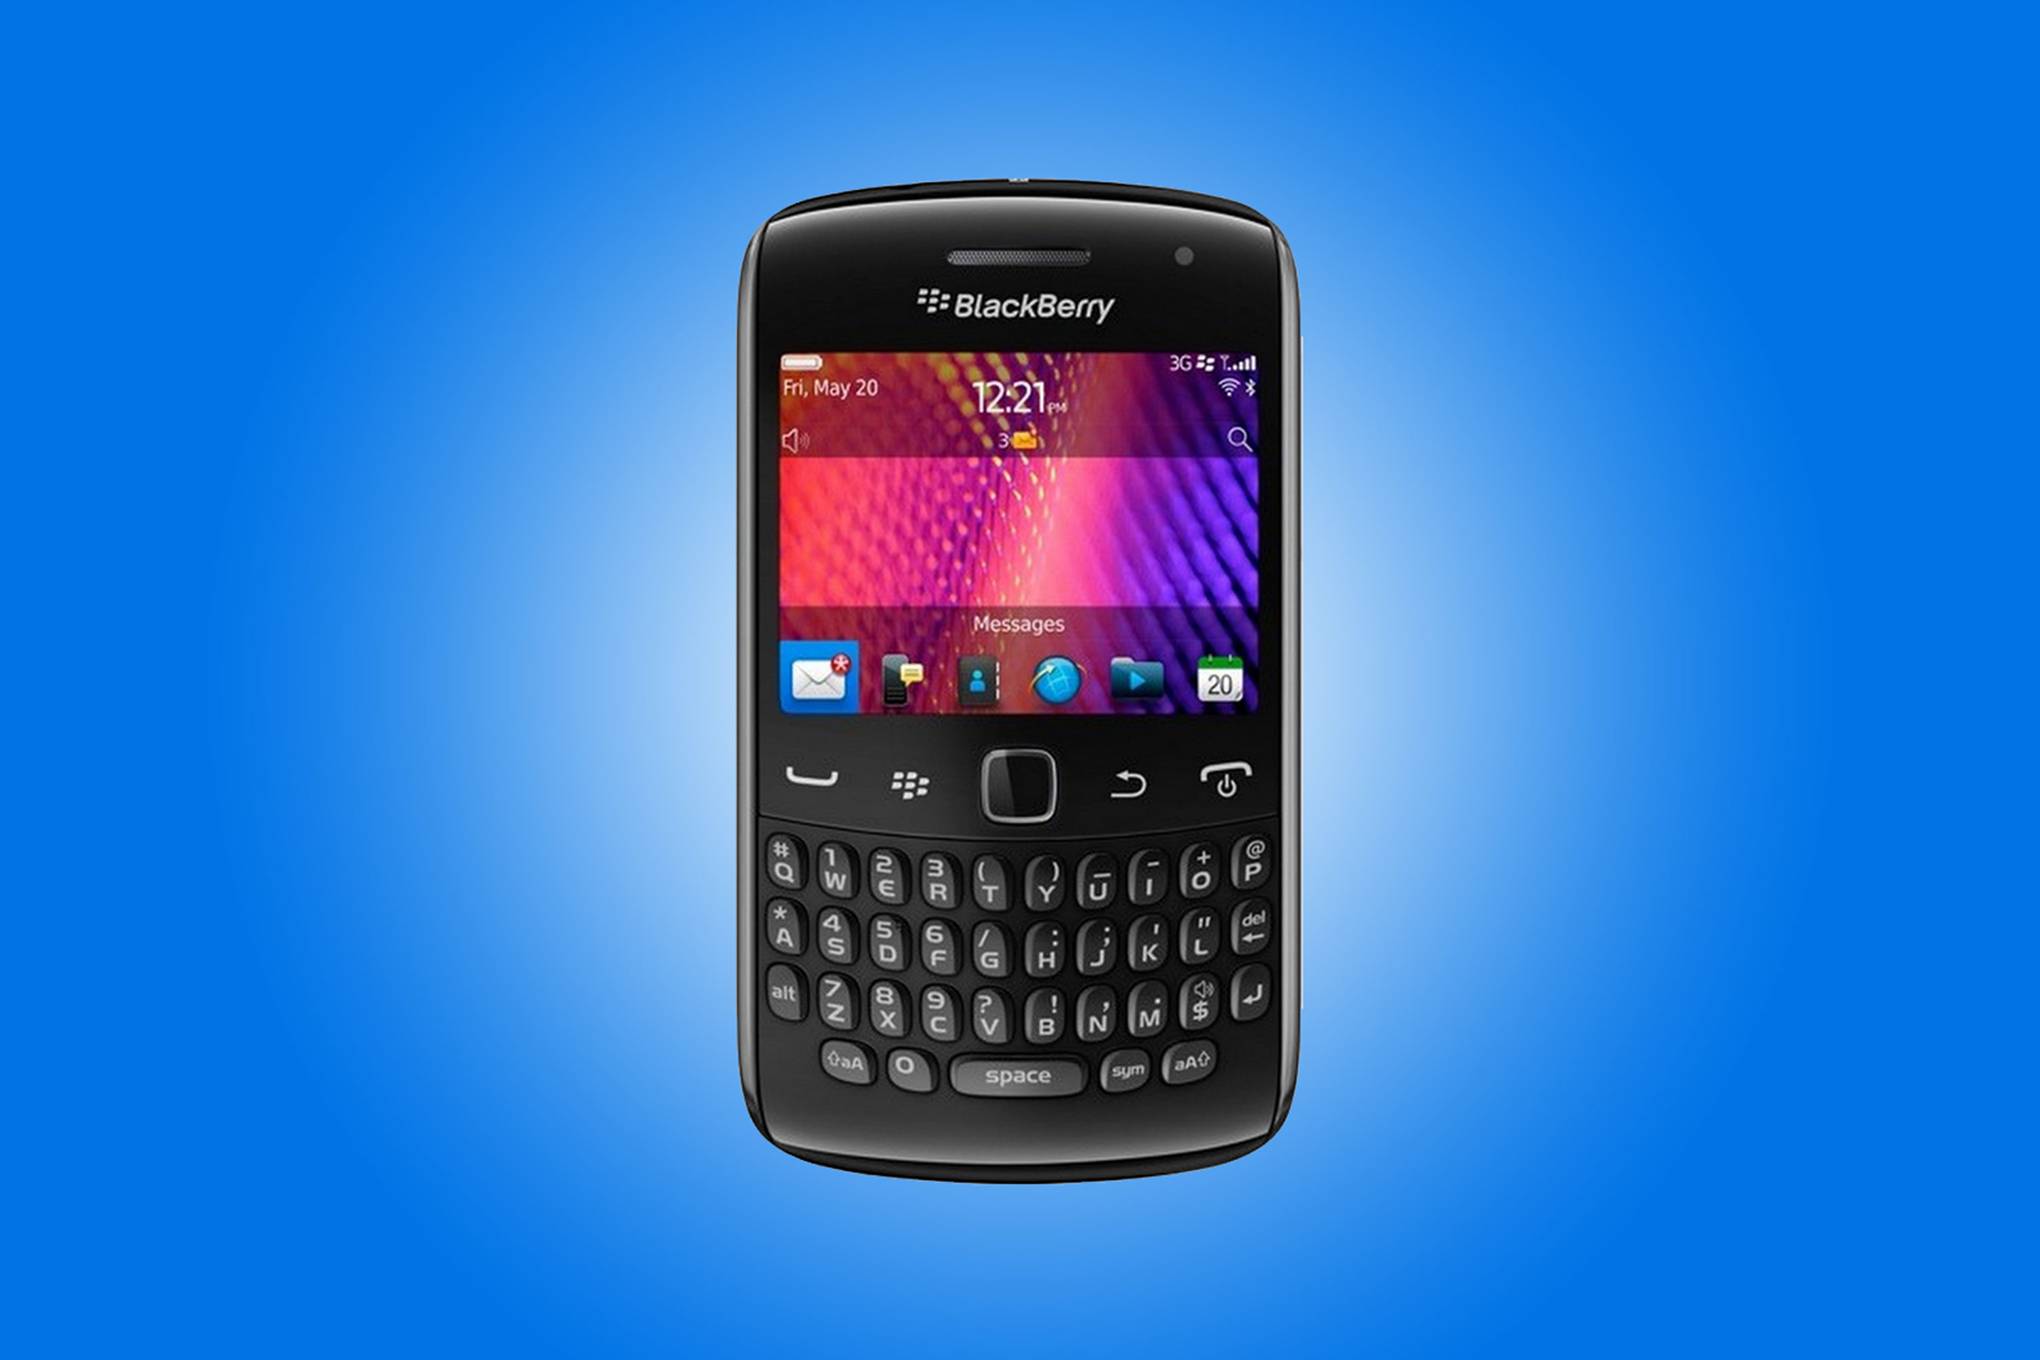 Blackberry Phone - Blackberry Key2 Le Review Pcmag - The blackberry ...